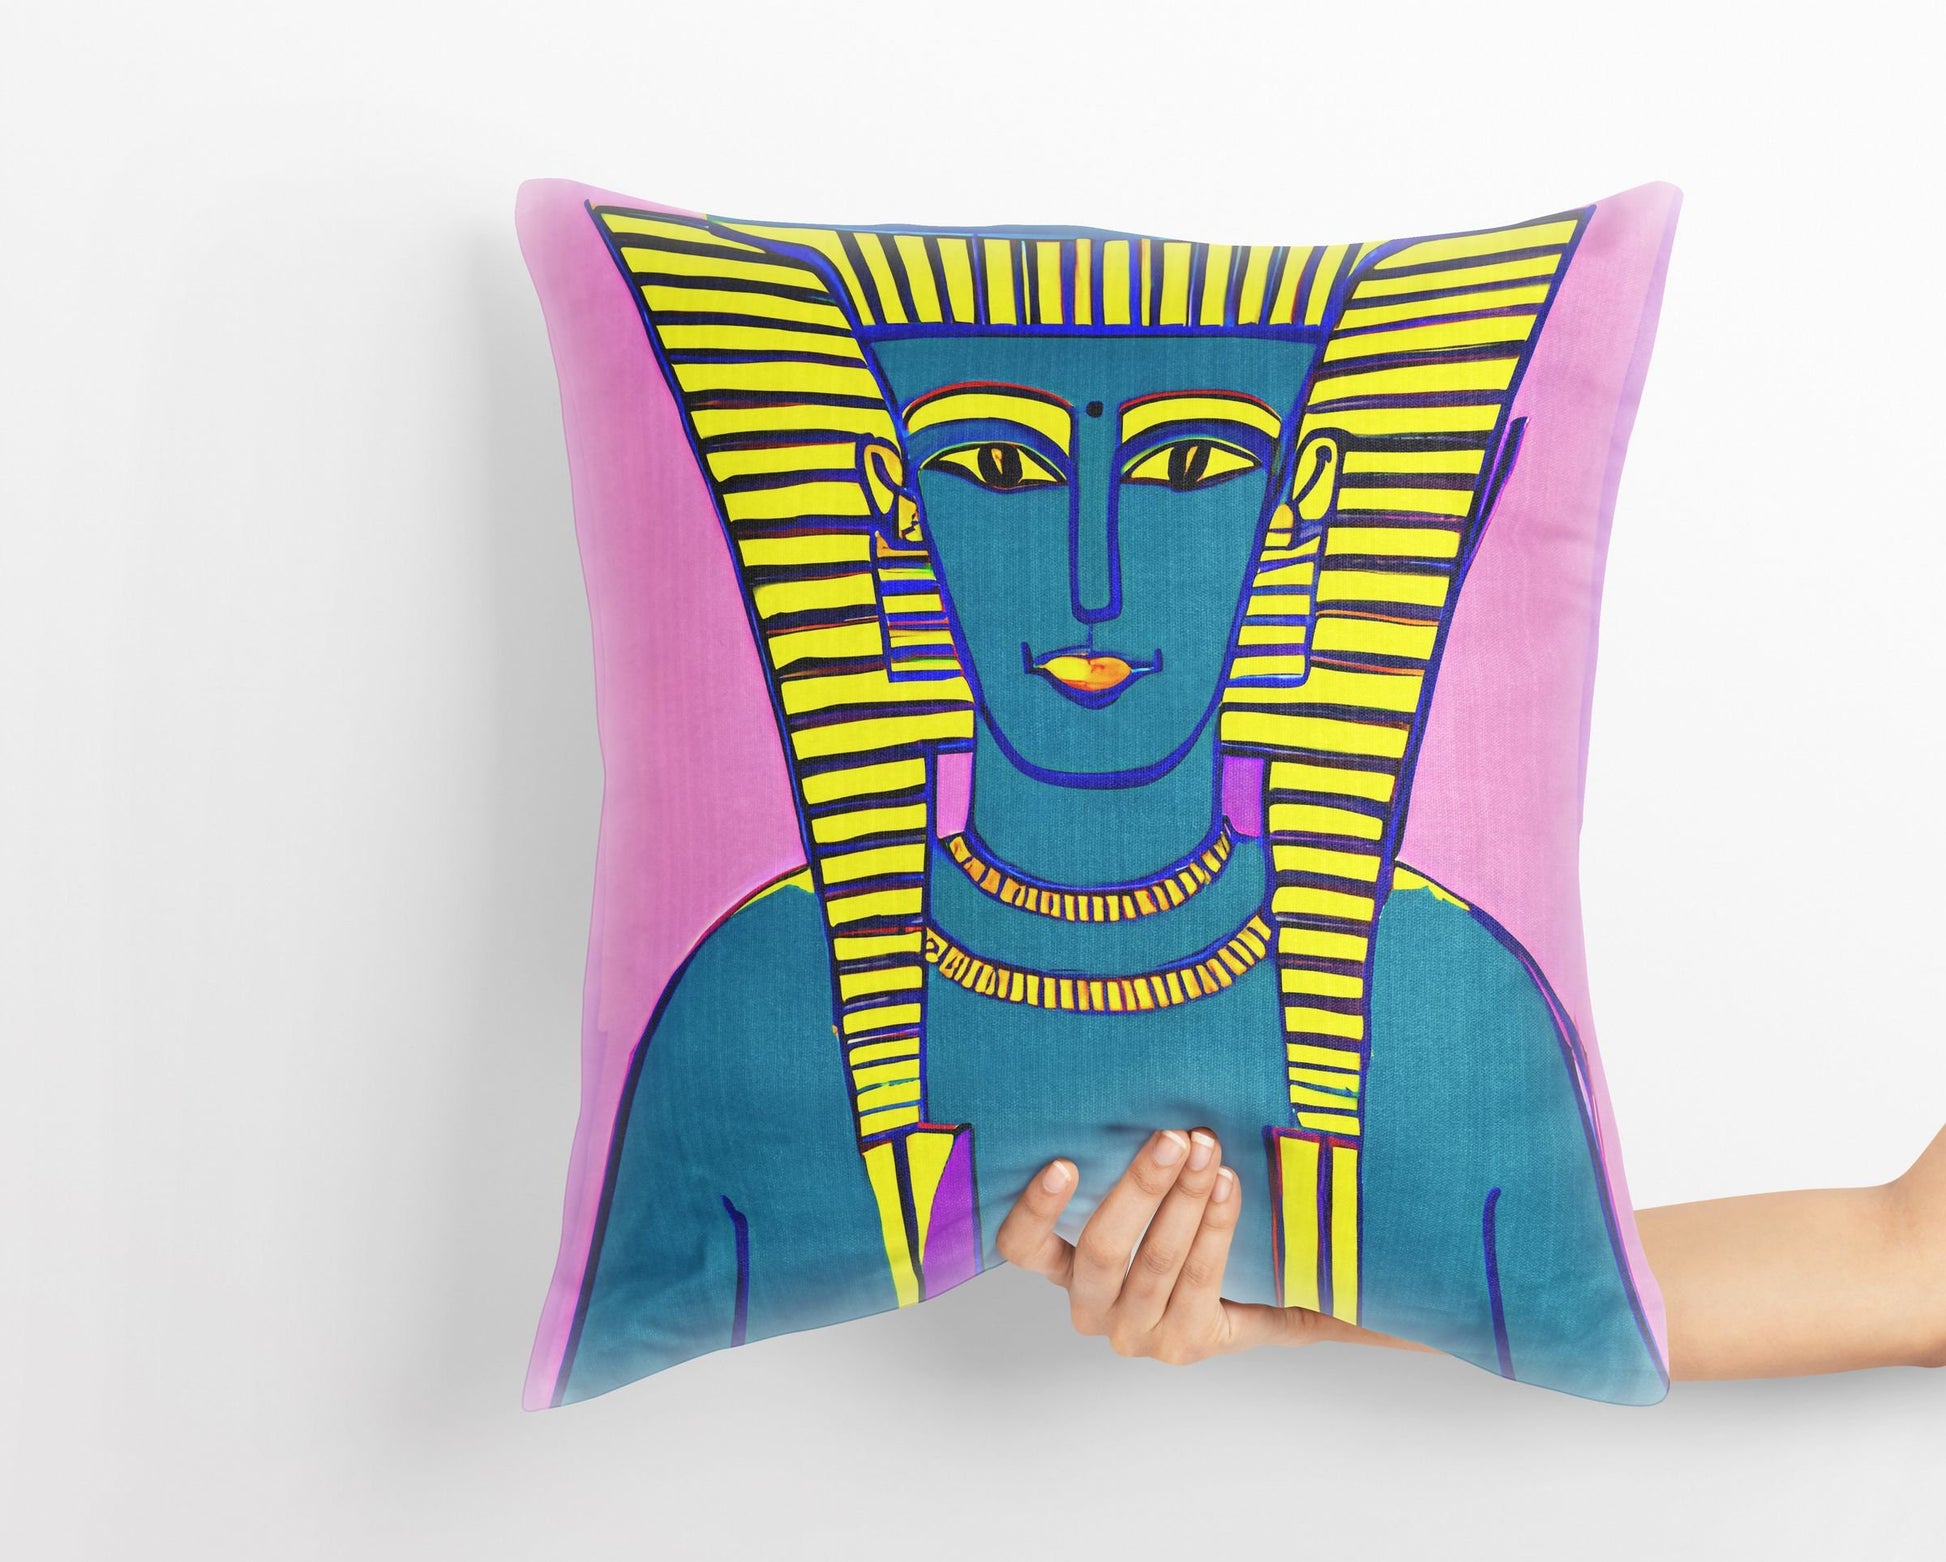 Pharaoh Of Ancient Egypt, Throw Pillow Cover, Abstract Art Pillow, Designer Pillow, Colorful Pillow Case, Watercolor Pillow Cases